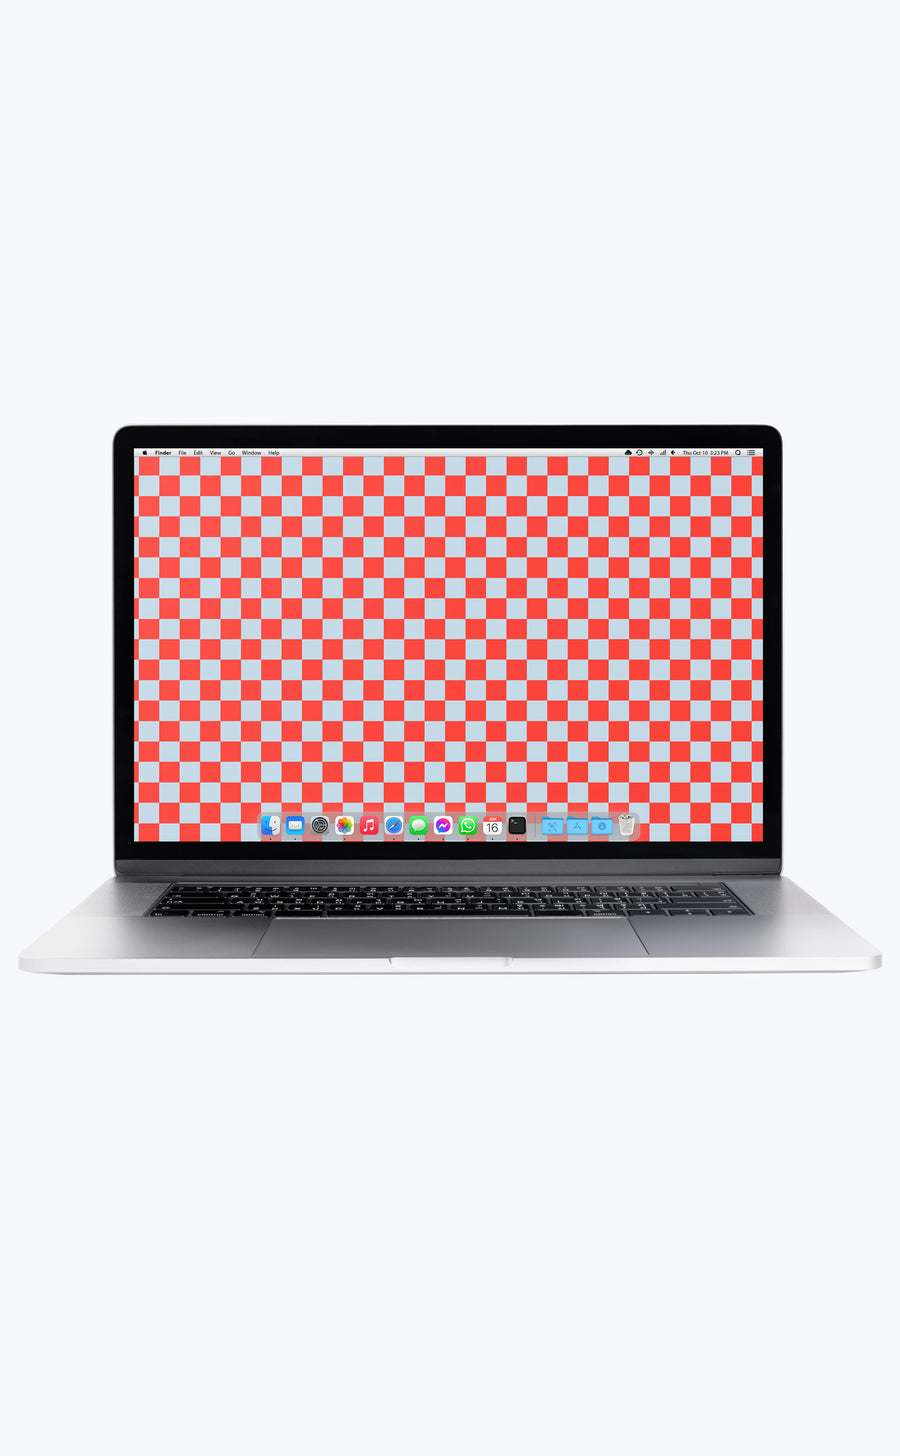 Red and Blue Checkerboard | Digital Laptop Wallpaper